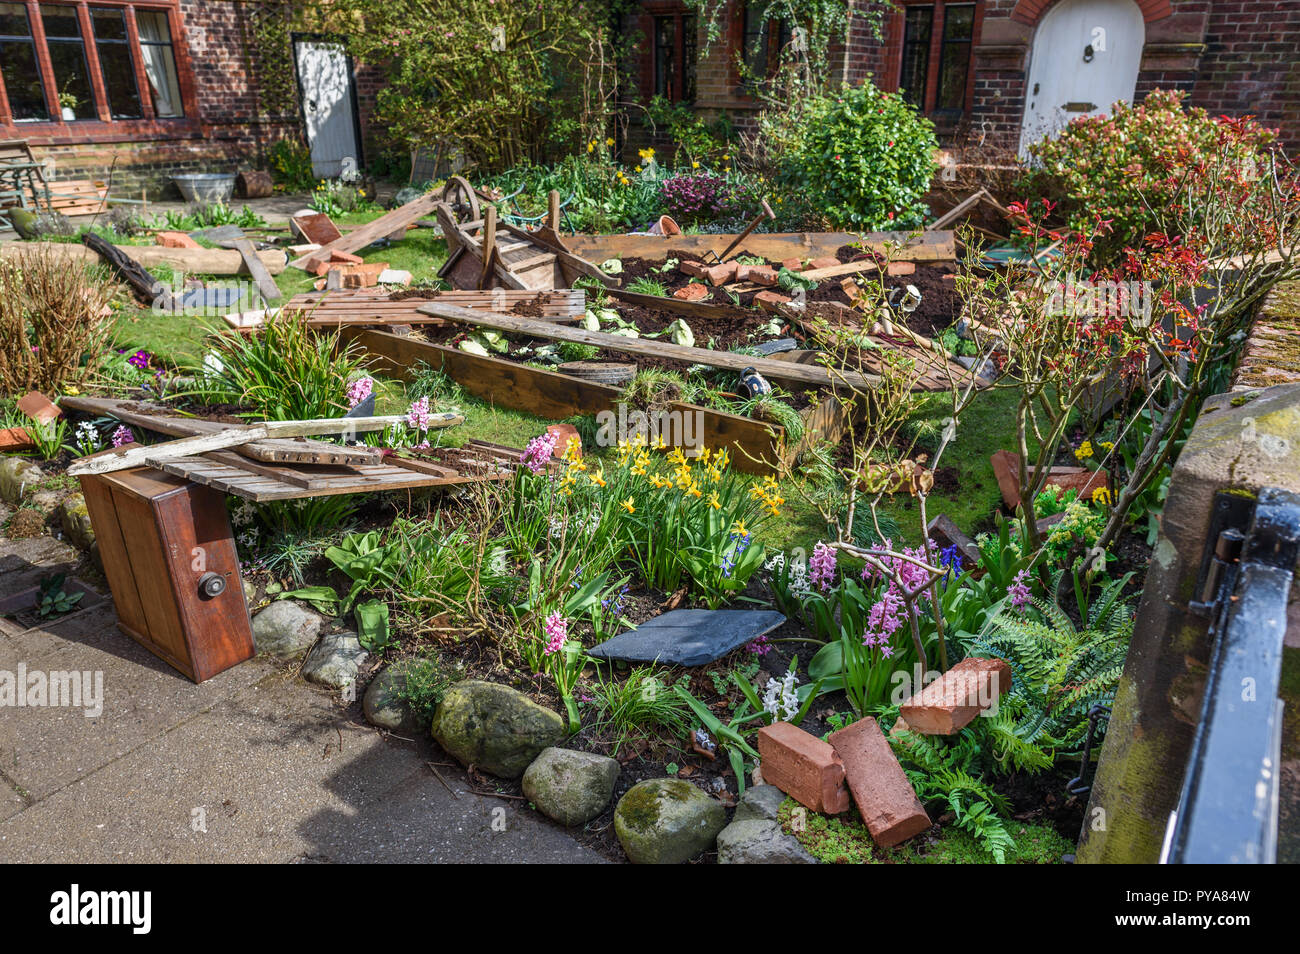 Props and debris litter a cottage garden for  the new BBC drama 'War Of The Worlds' by HG Wells,filmed at Great Budworth village, Cheshire, April 2018 Stock Photo